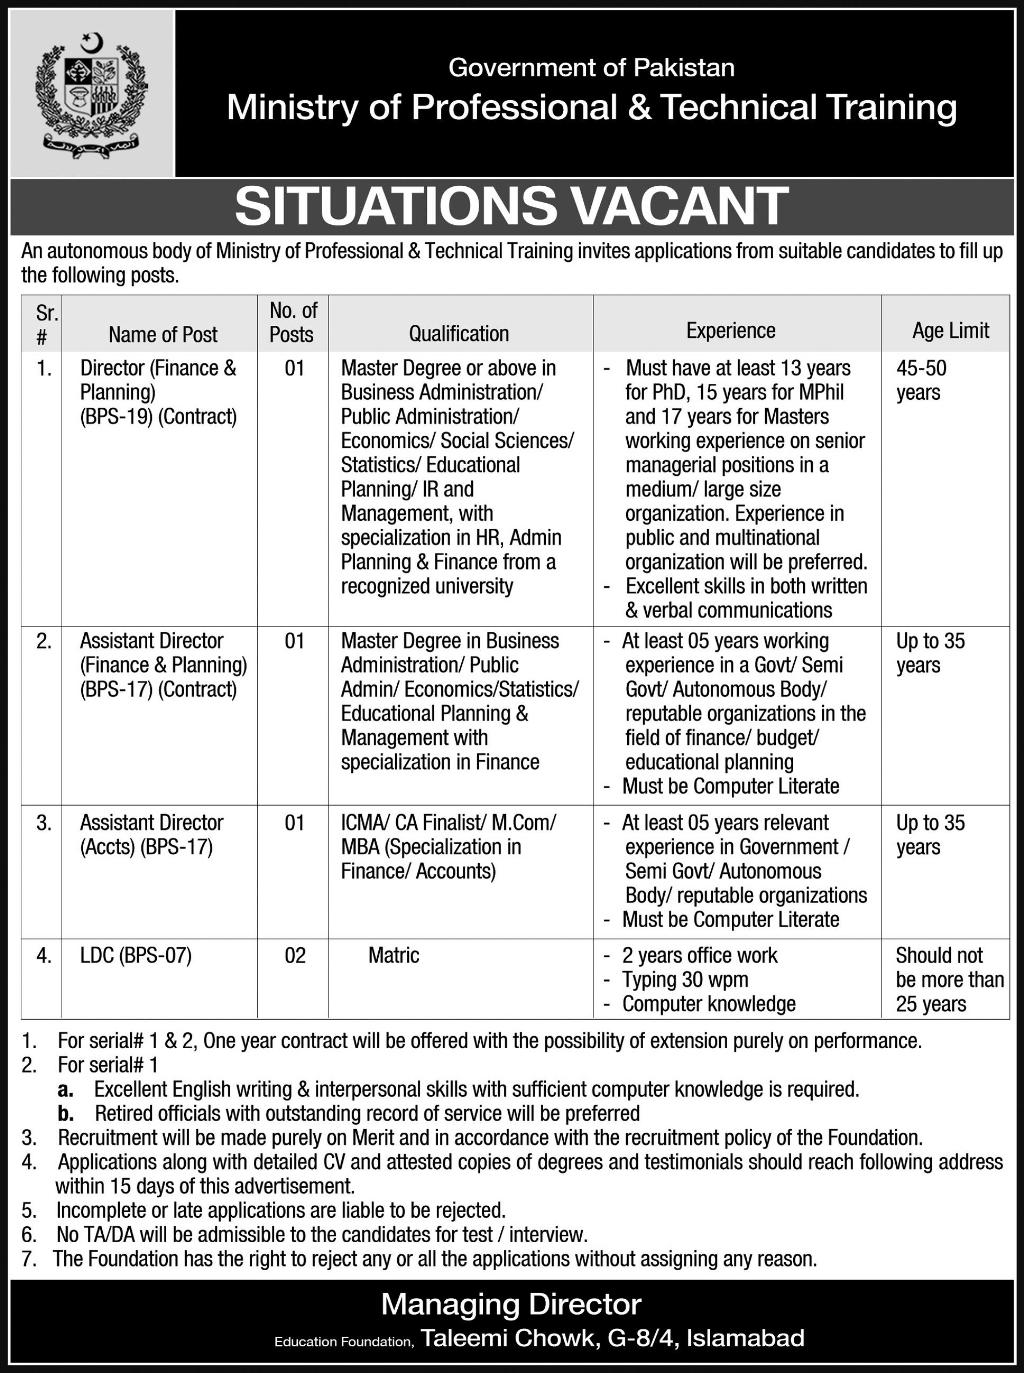 Govt jobs for experienced it professionals 2012